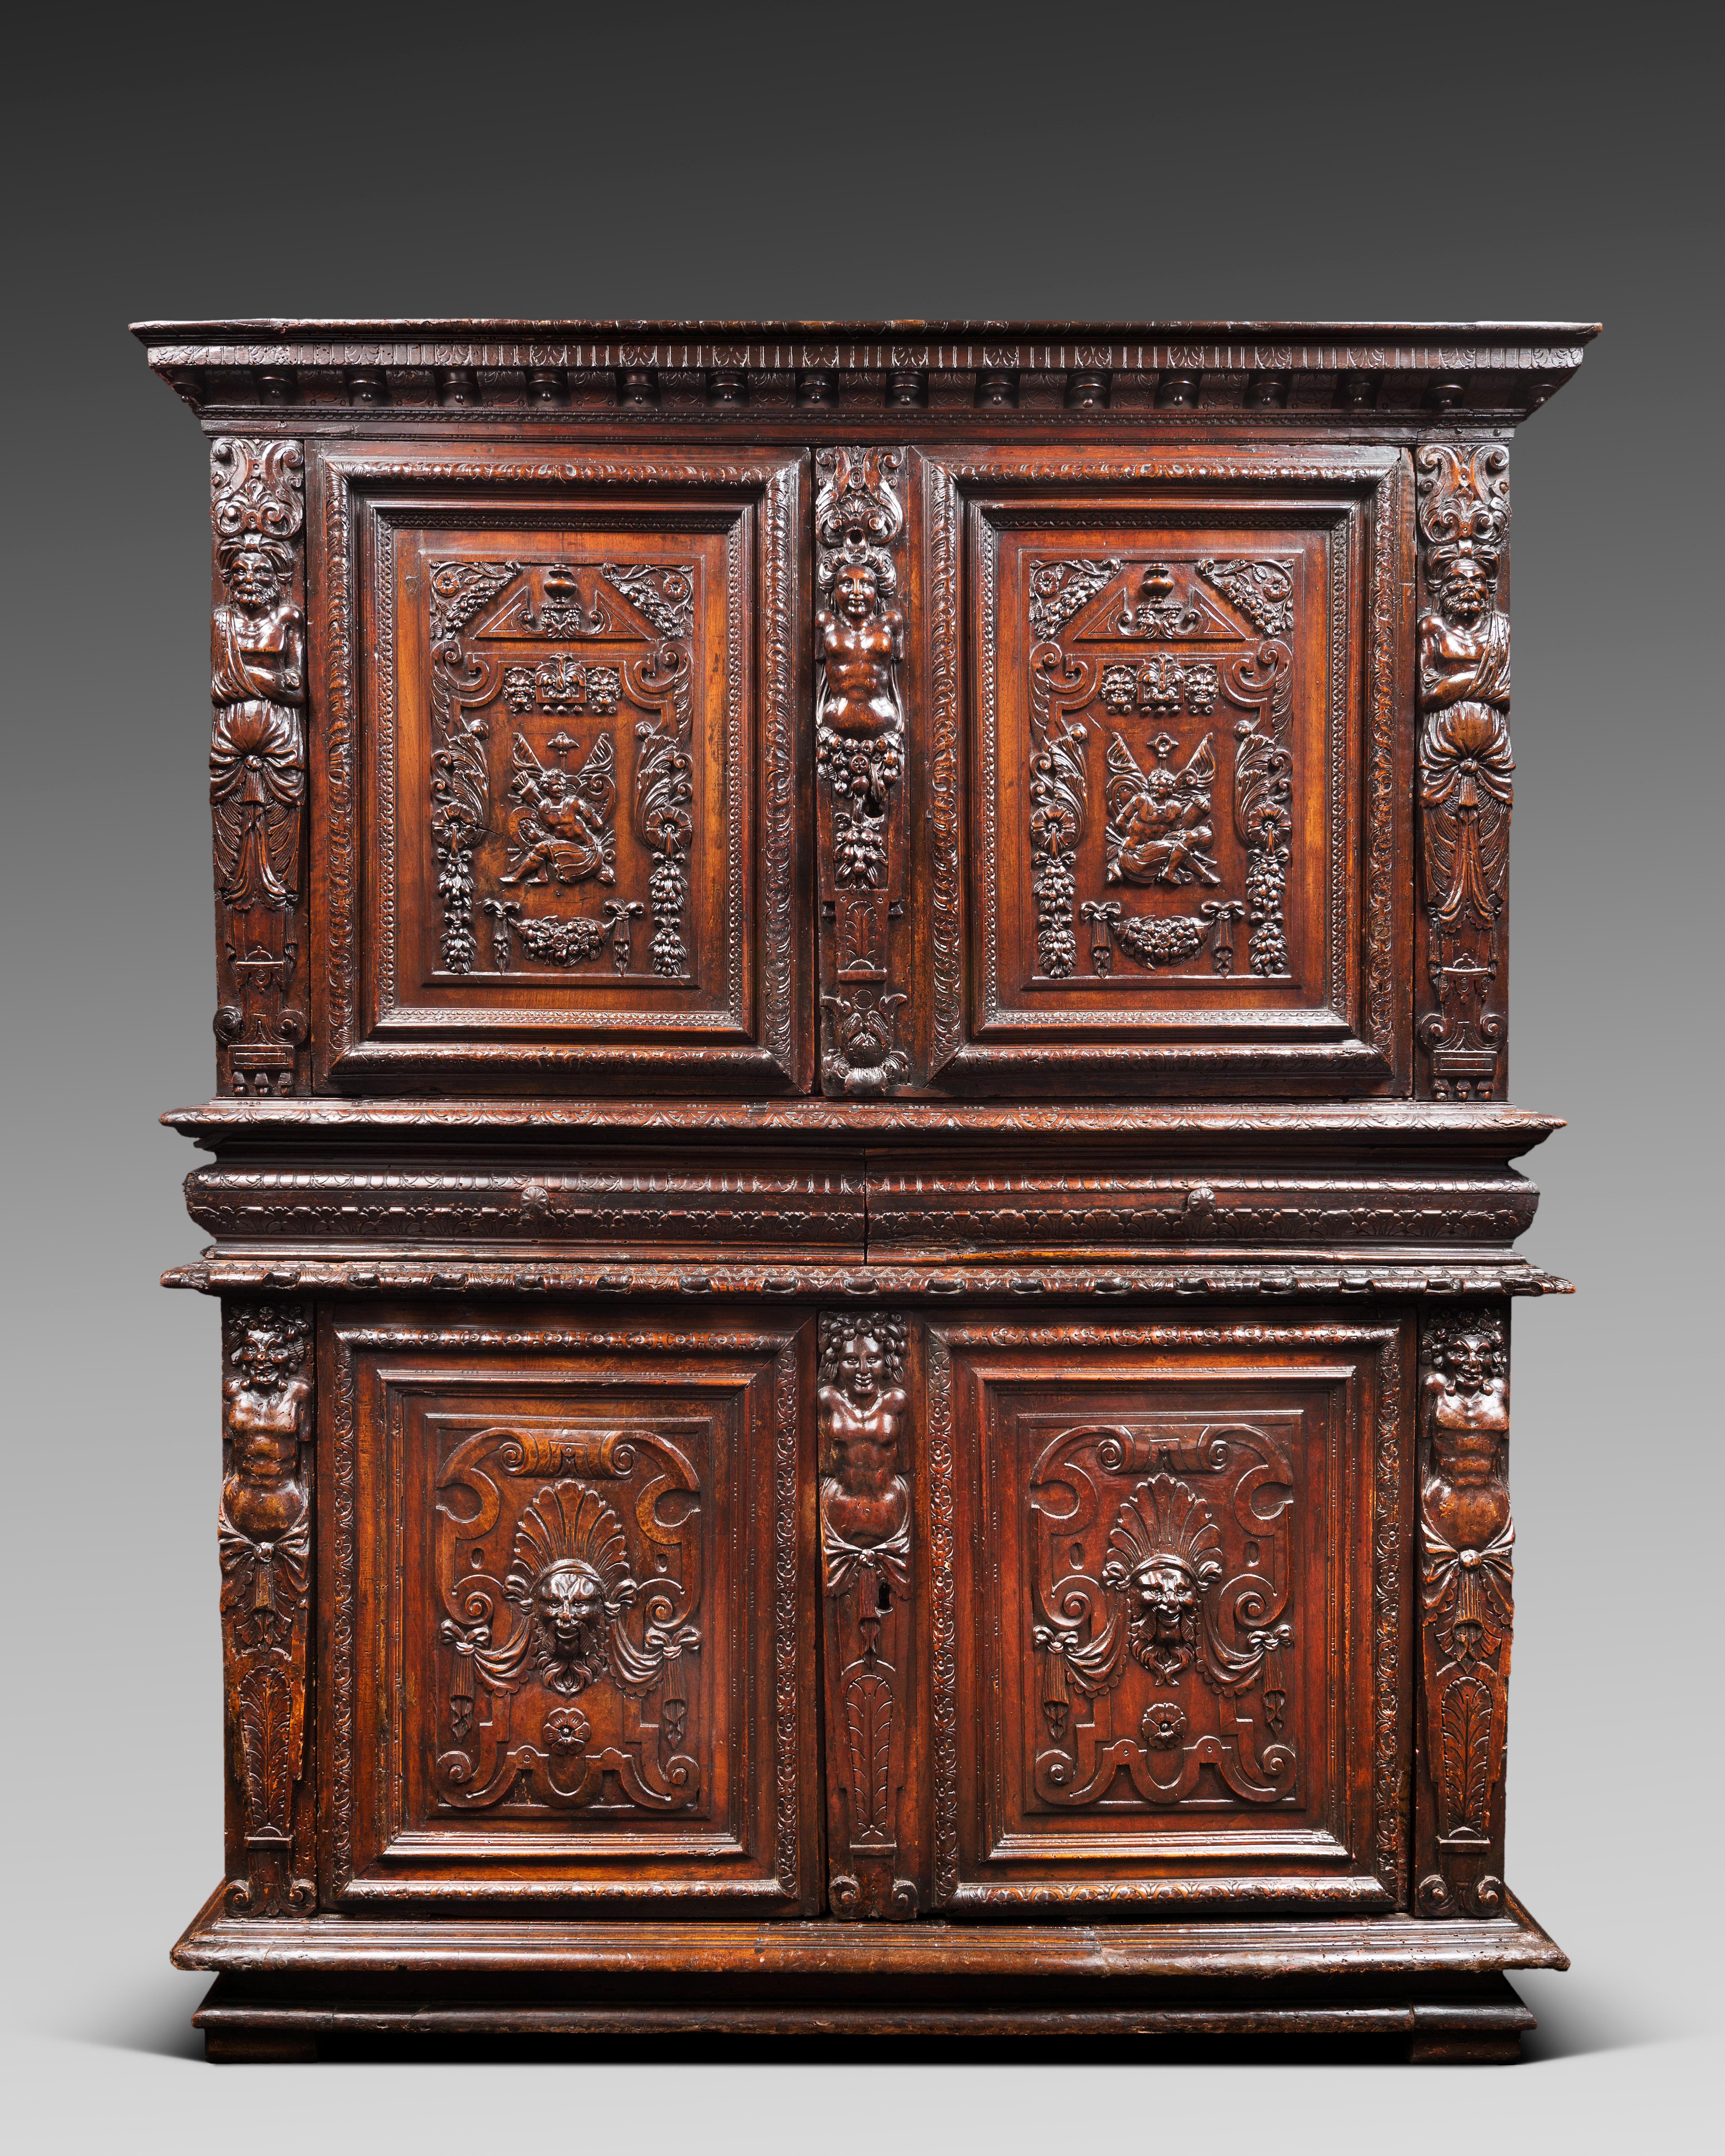 Original lock and key

This piece of furniture shows no recess on its upper part. It opens with four folding-doors and two drawers within the belt. The key bears the date 1524 above cross motifs.

Burgundy and Lyon regions subordinated